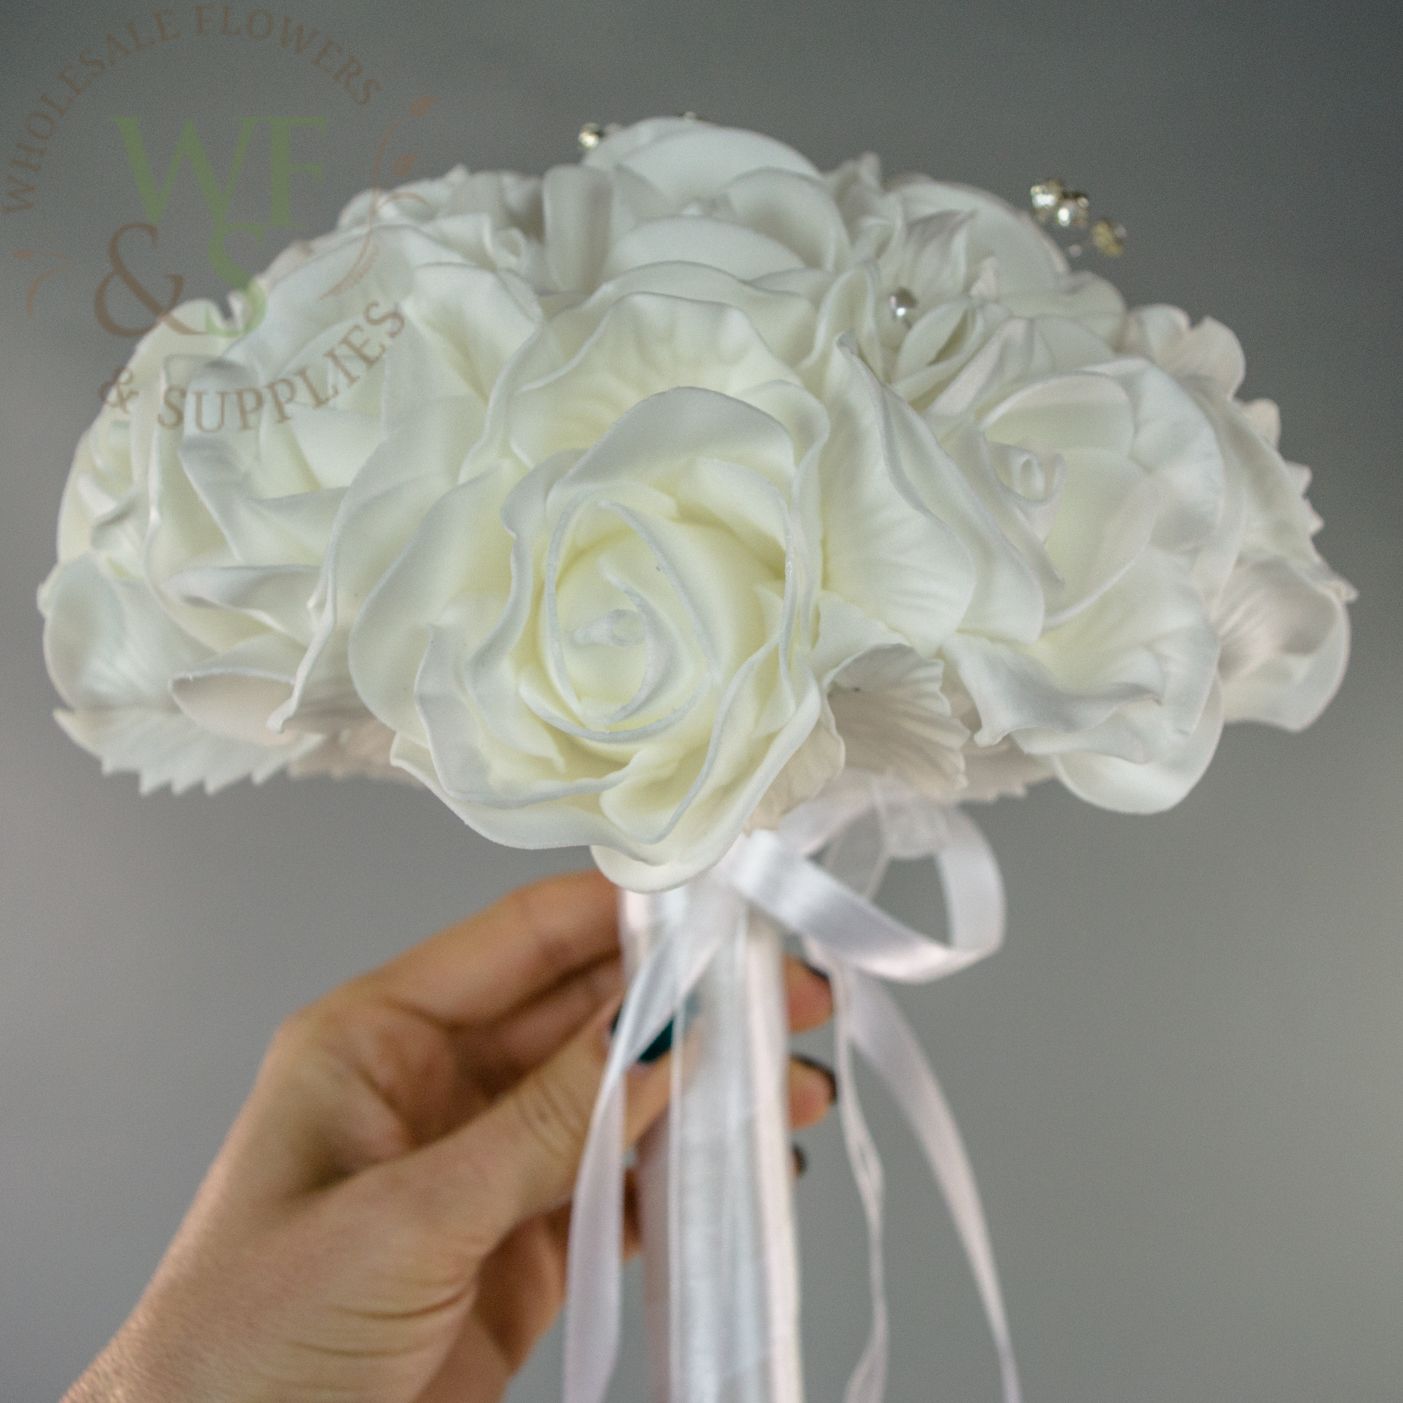 Wedding Bouquet White Roses Rhinestone Ornaments and White Pearls